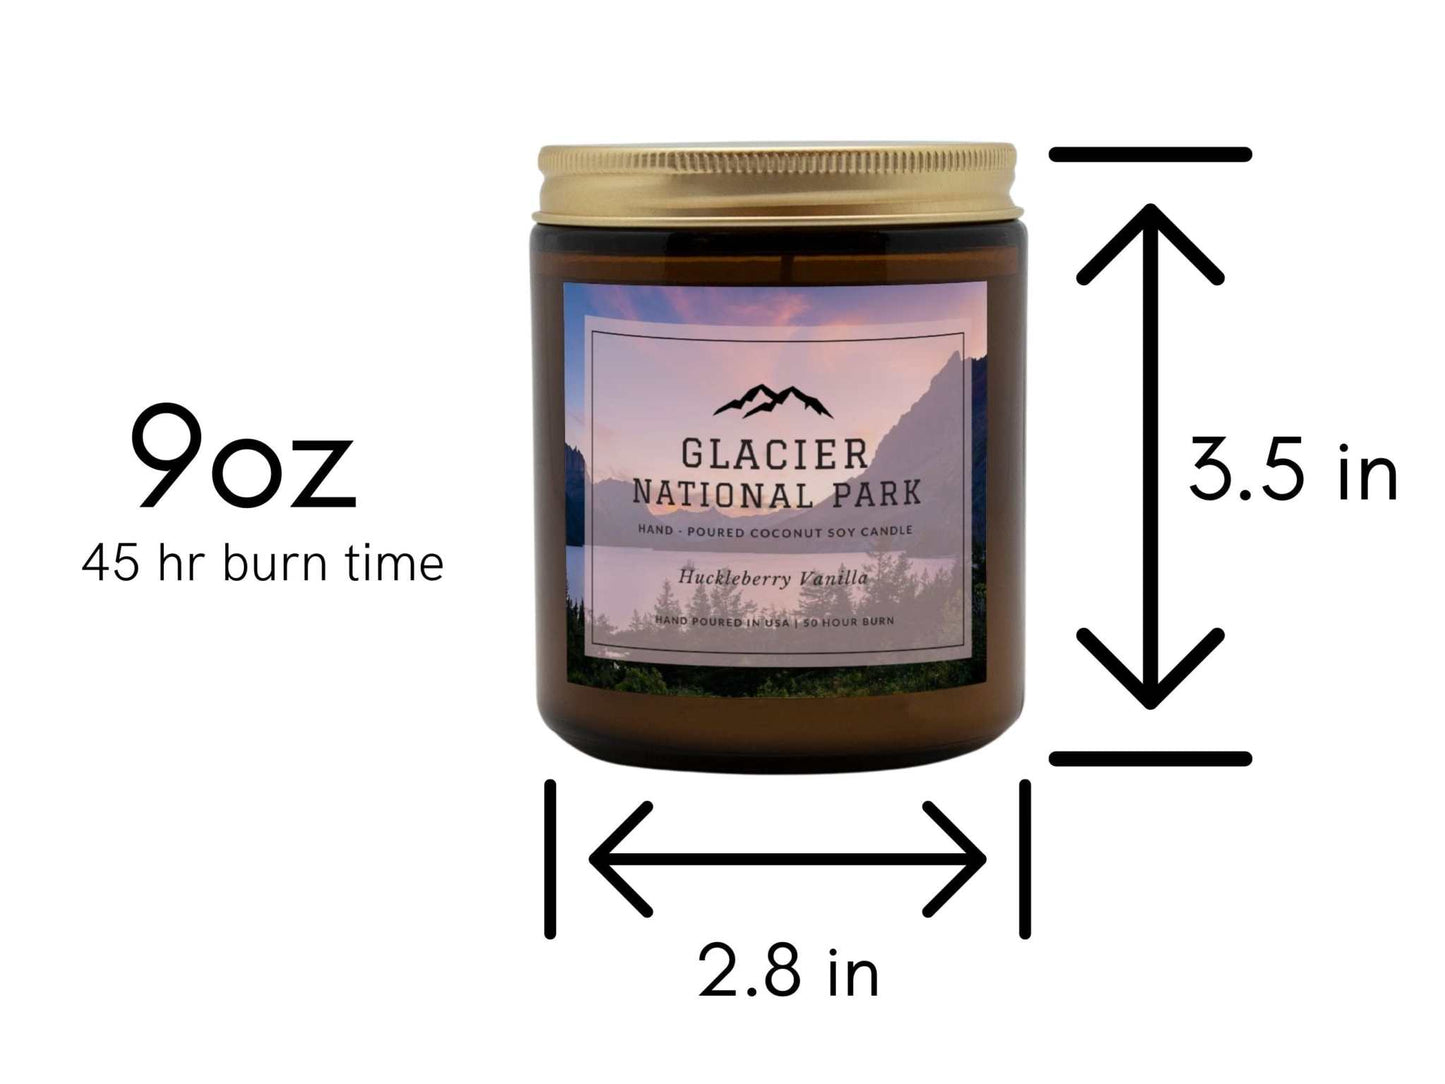 Acadia National Park Sea Salt & Sage CandleBring home the smell of the most beautiful places on earth, with these 9 oz coconut soy wax hand-poured National Park candles.
The Acadia National Park refreshing fr